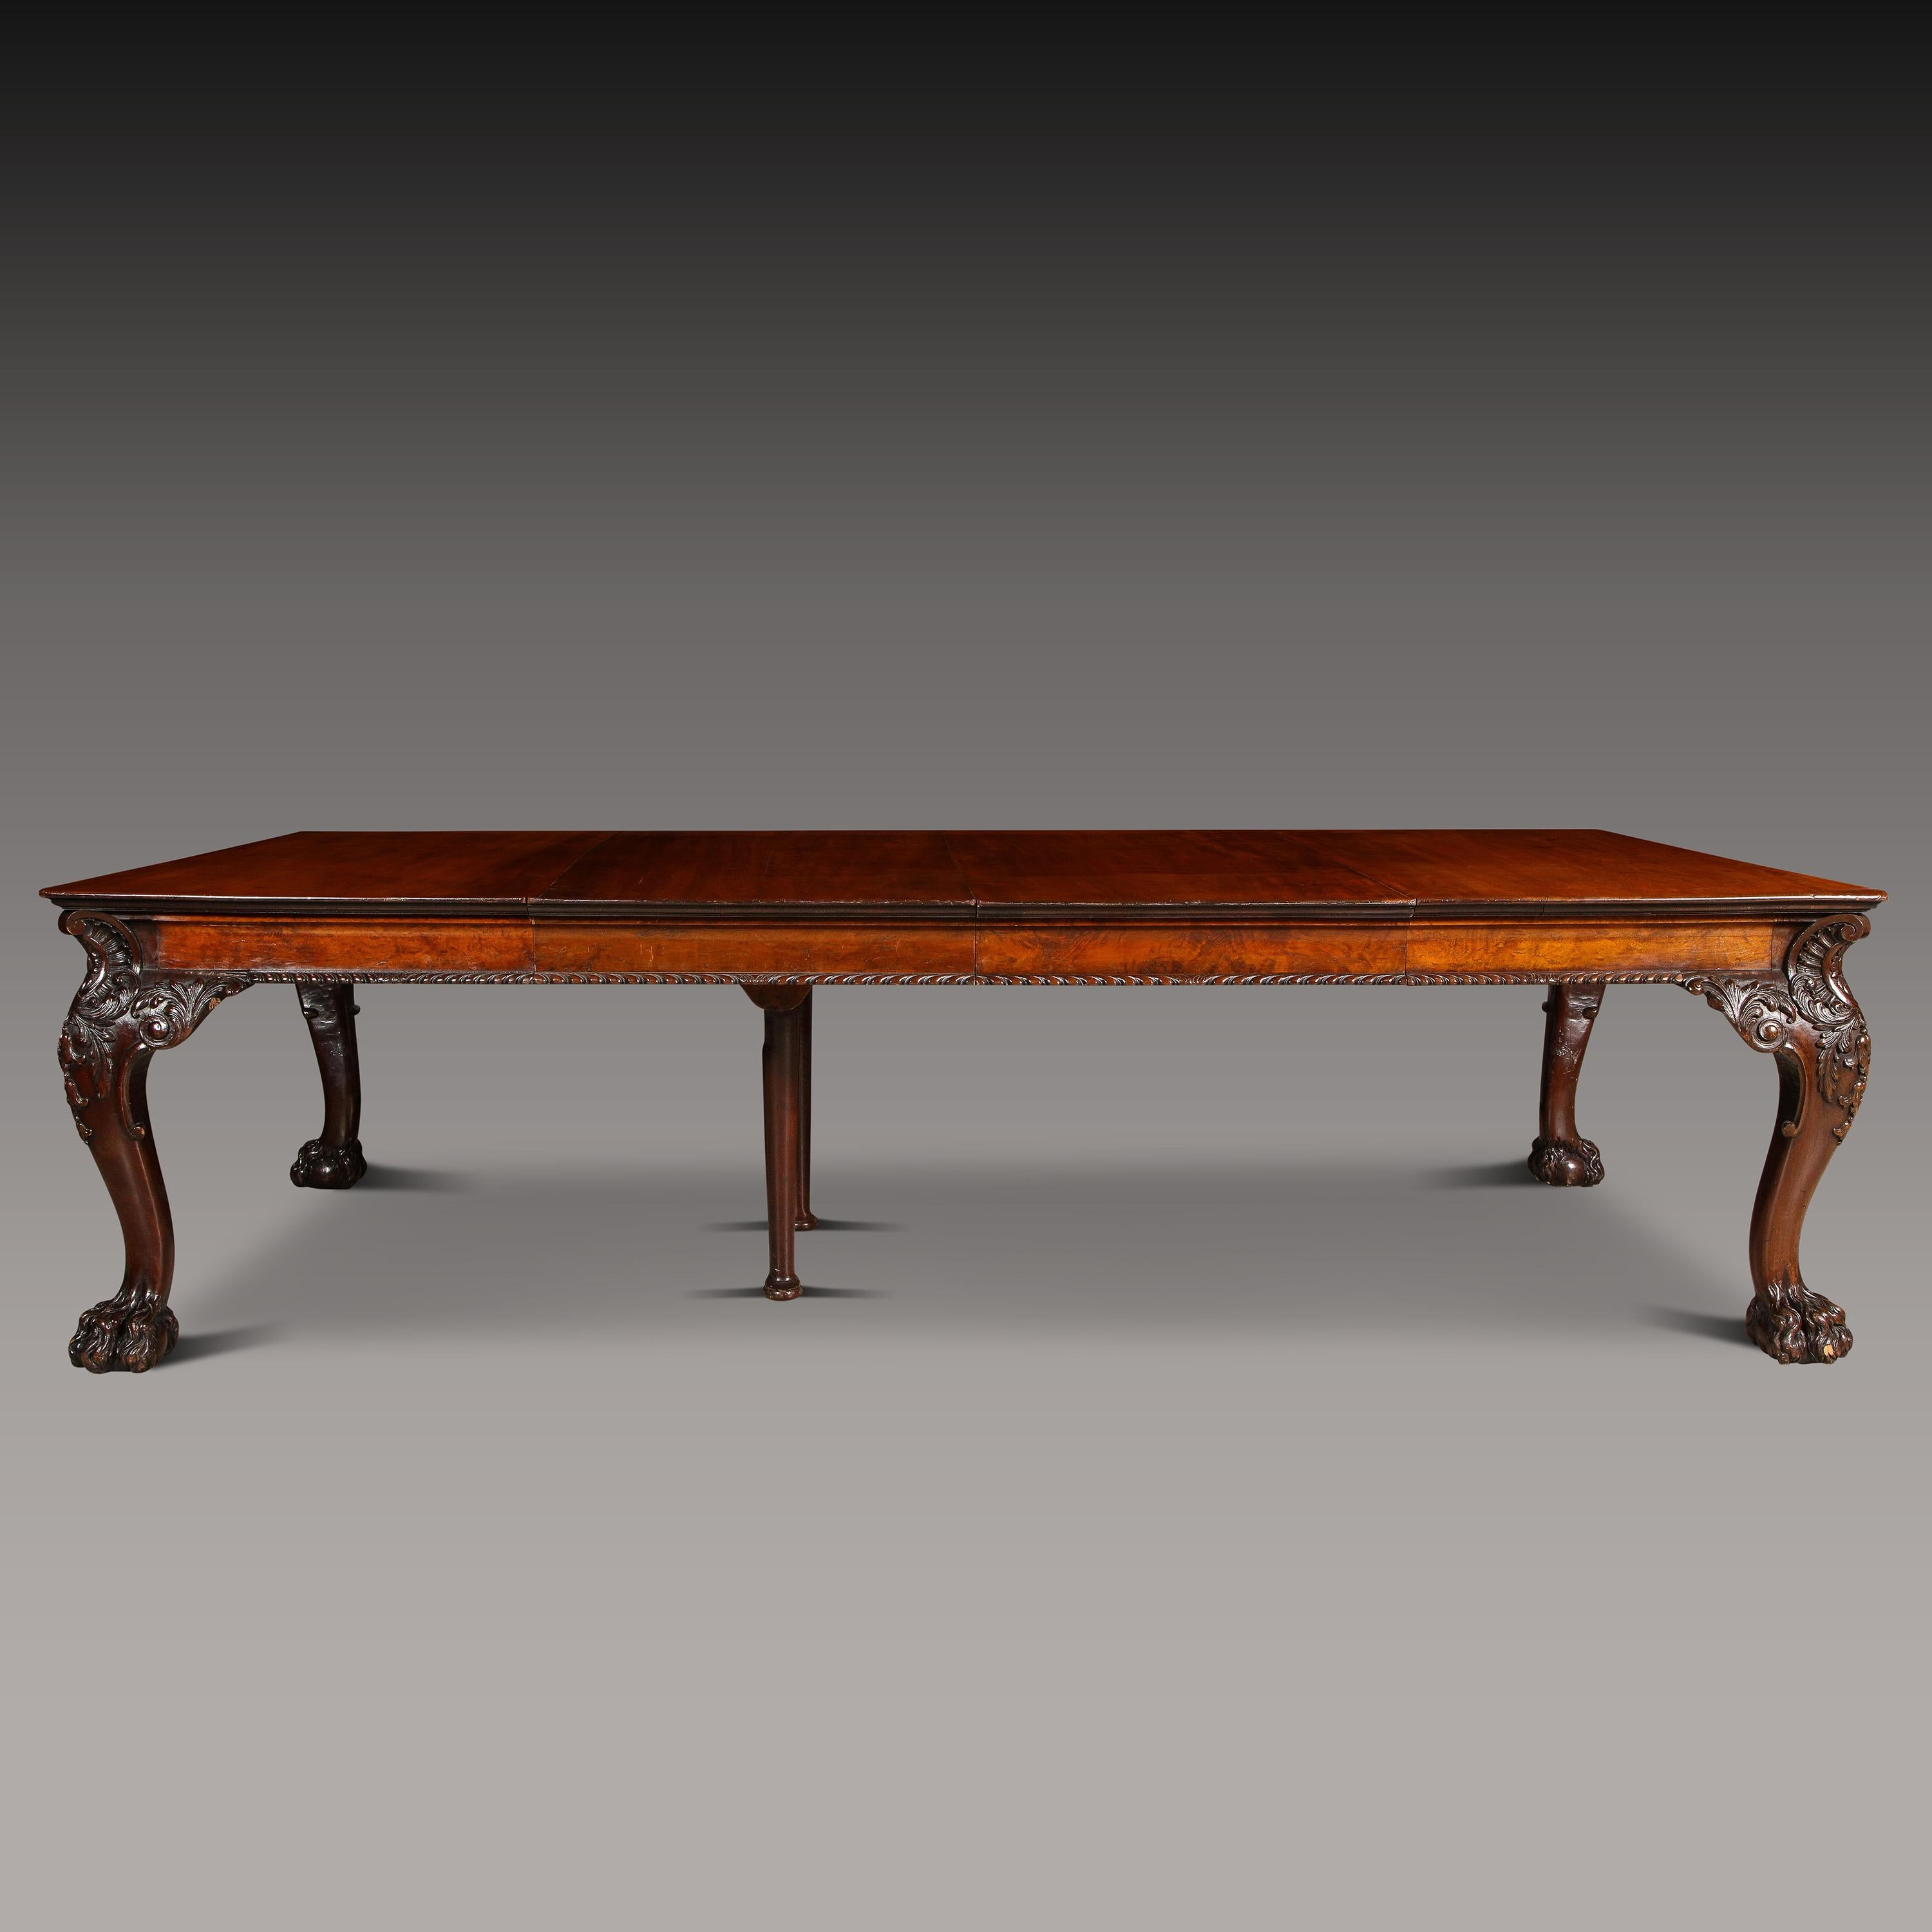 A Handsome Mahogany Irish extending dining table. Early to mid-19th century in William IV style.
Supported on four bold cabriole legs with an acanthus carved knee terminating in a hairy paw foot.
A burl veneer gadrooned apron supporting a solid